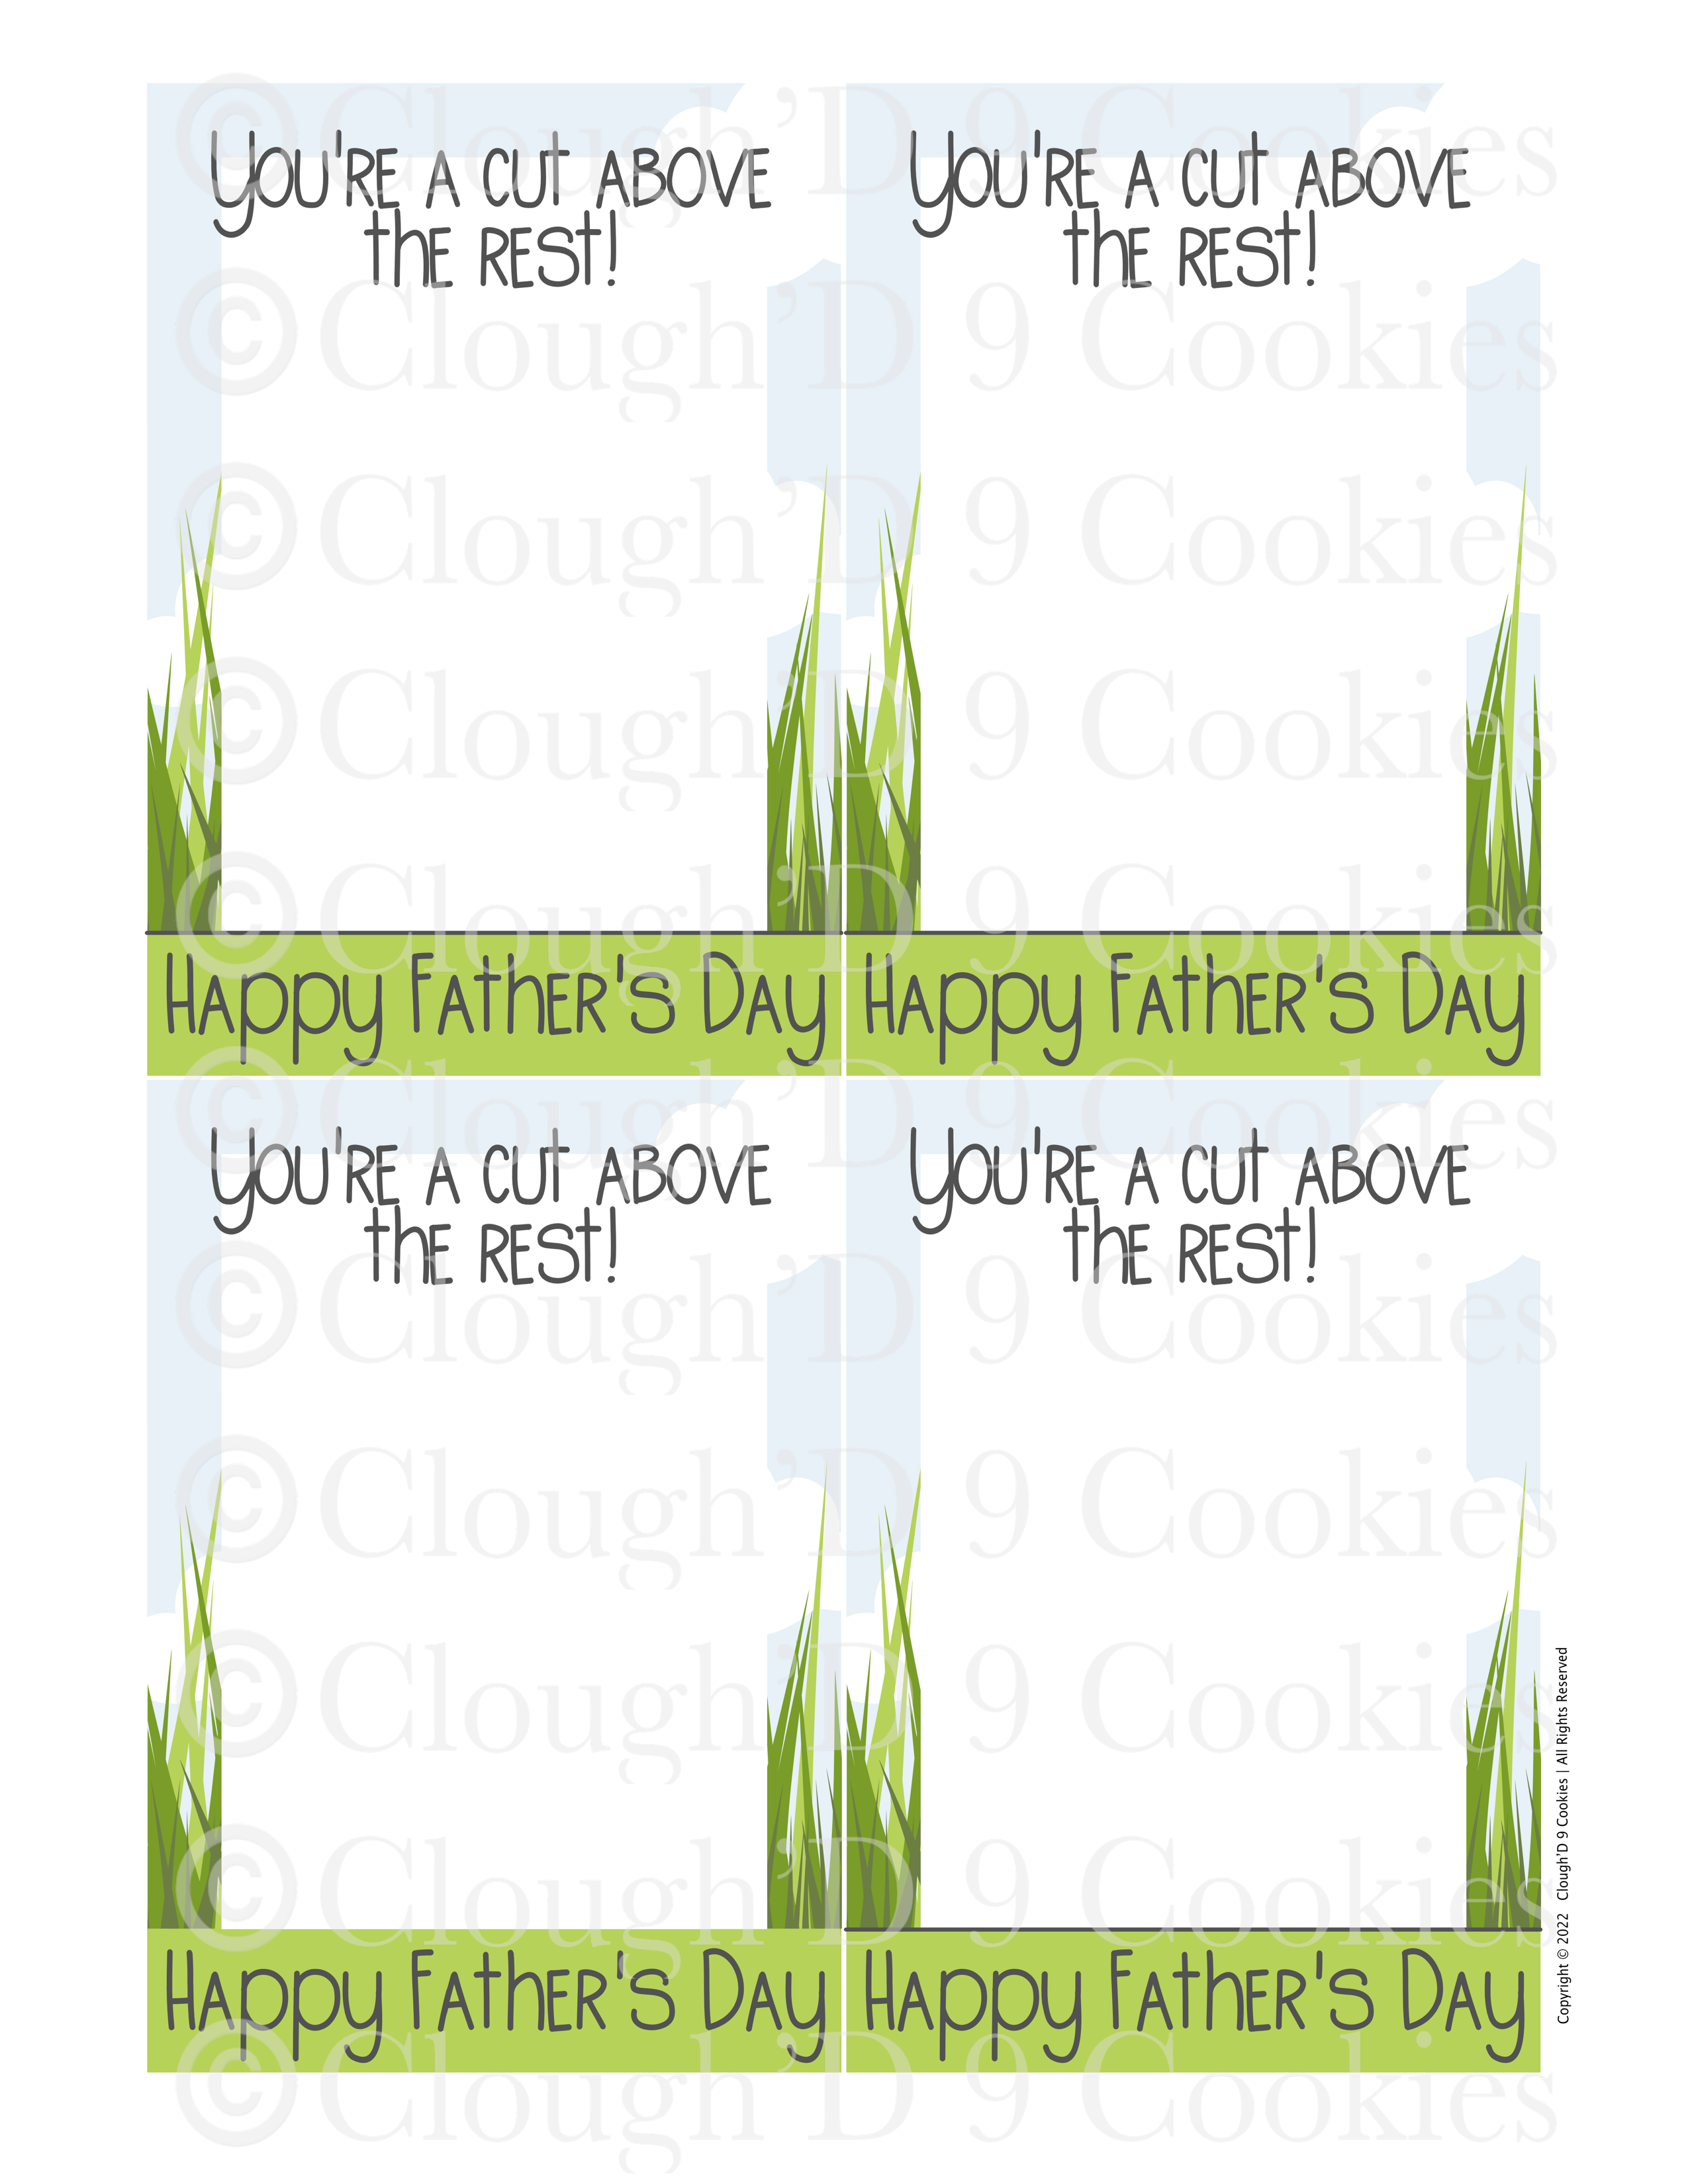 You're A Cut Above the Rest! *Ink Saver* Cookie Card